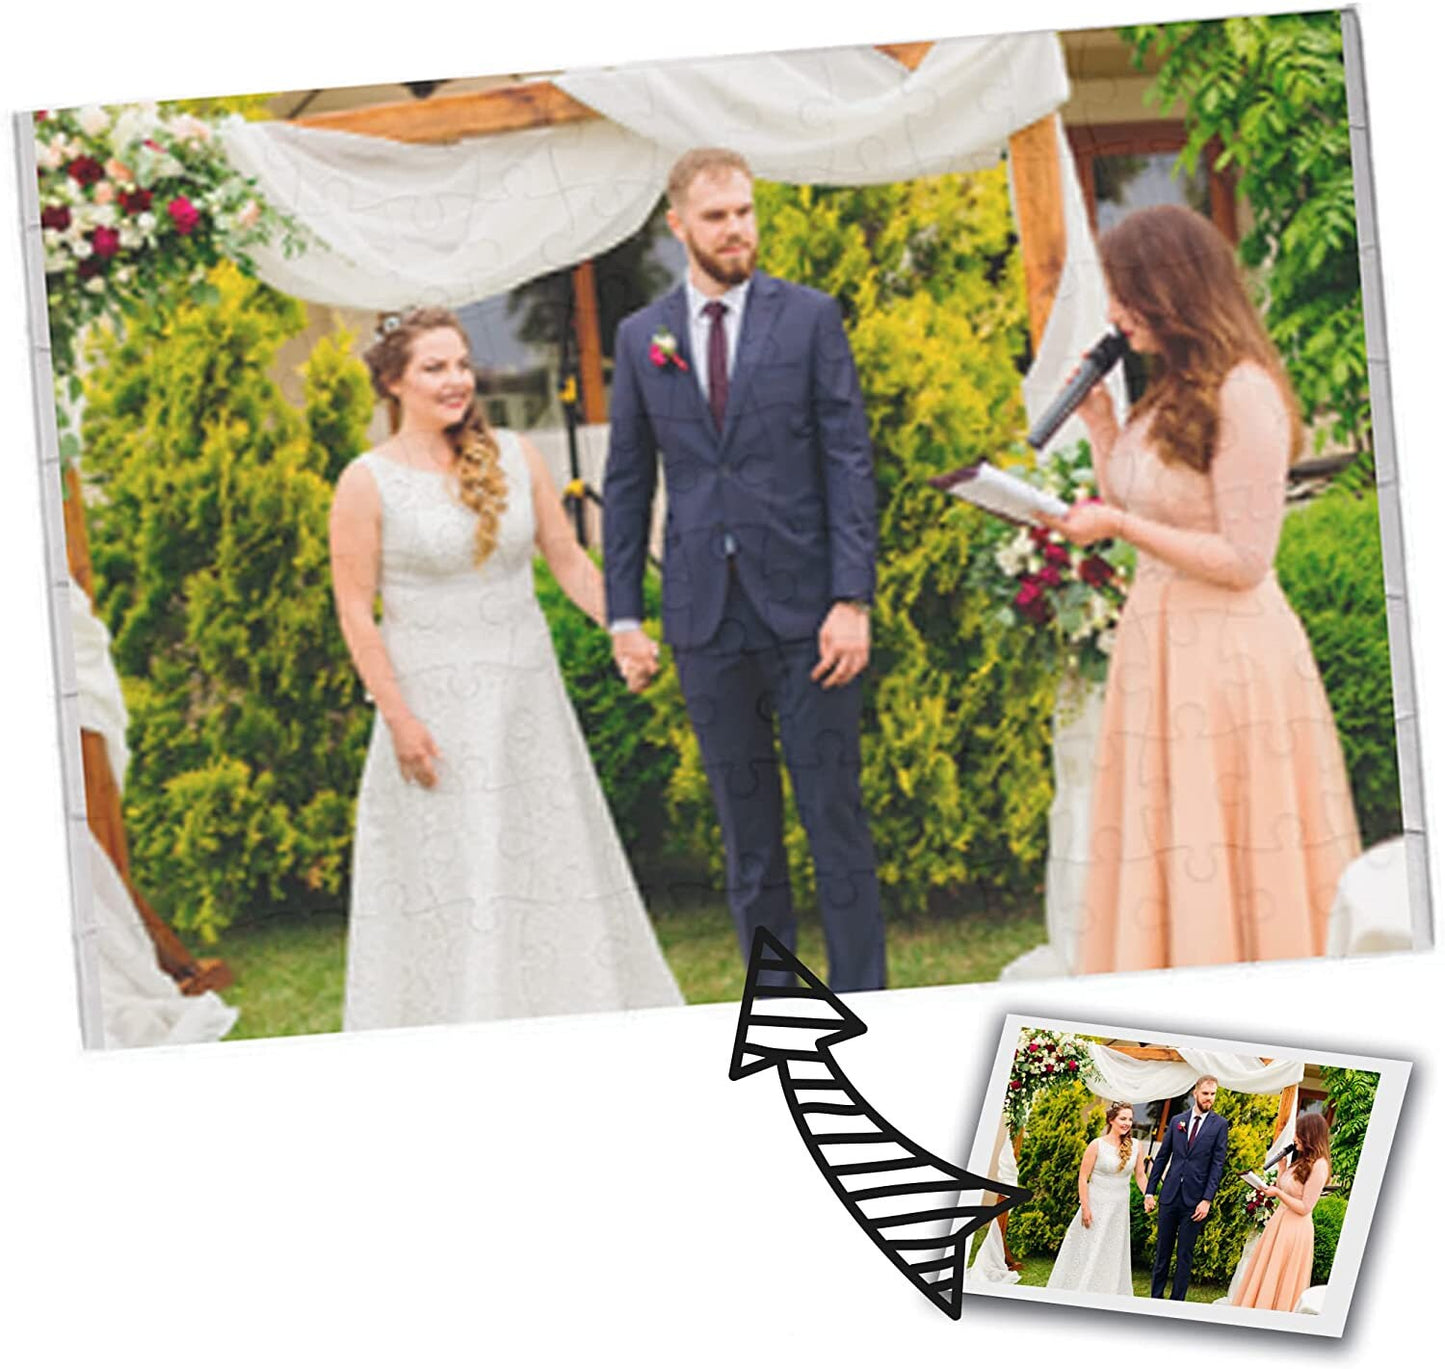 Personalised Wedding Jigsaw Puzzle Wedding day Wedding Gifts Own Photo Puzzle A4 size Lovely Ideal Present